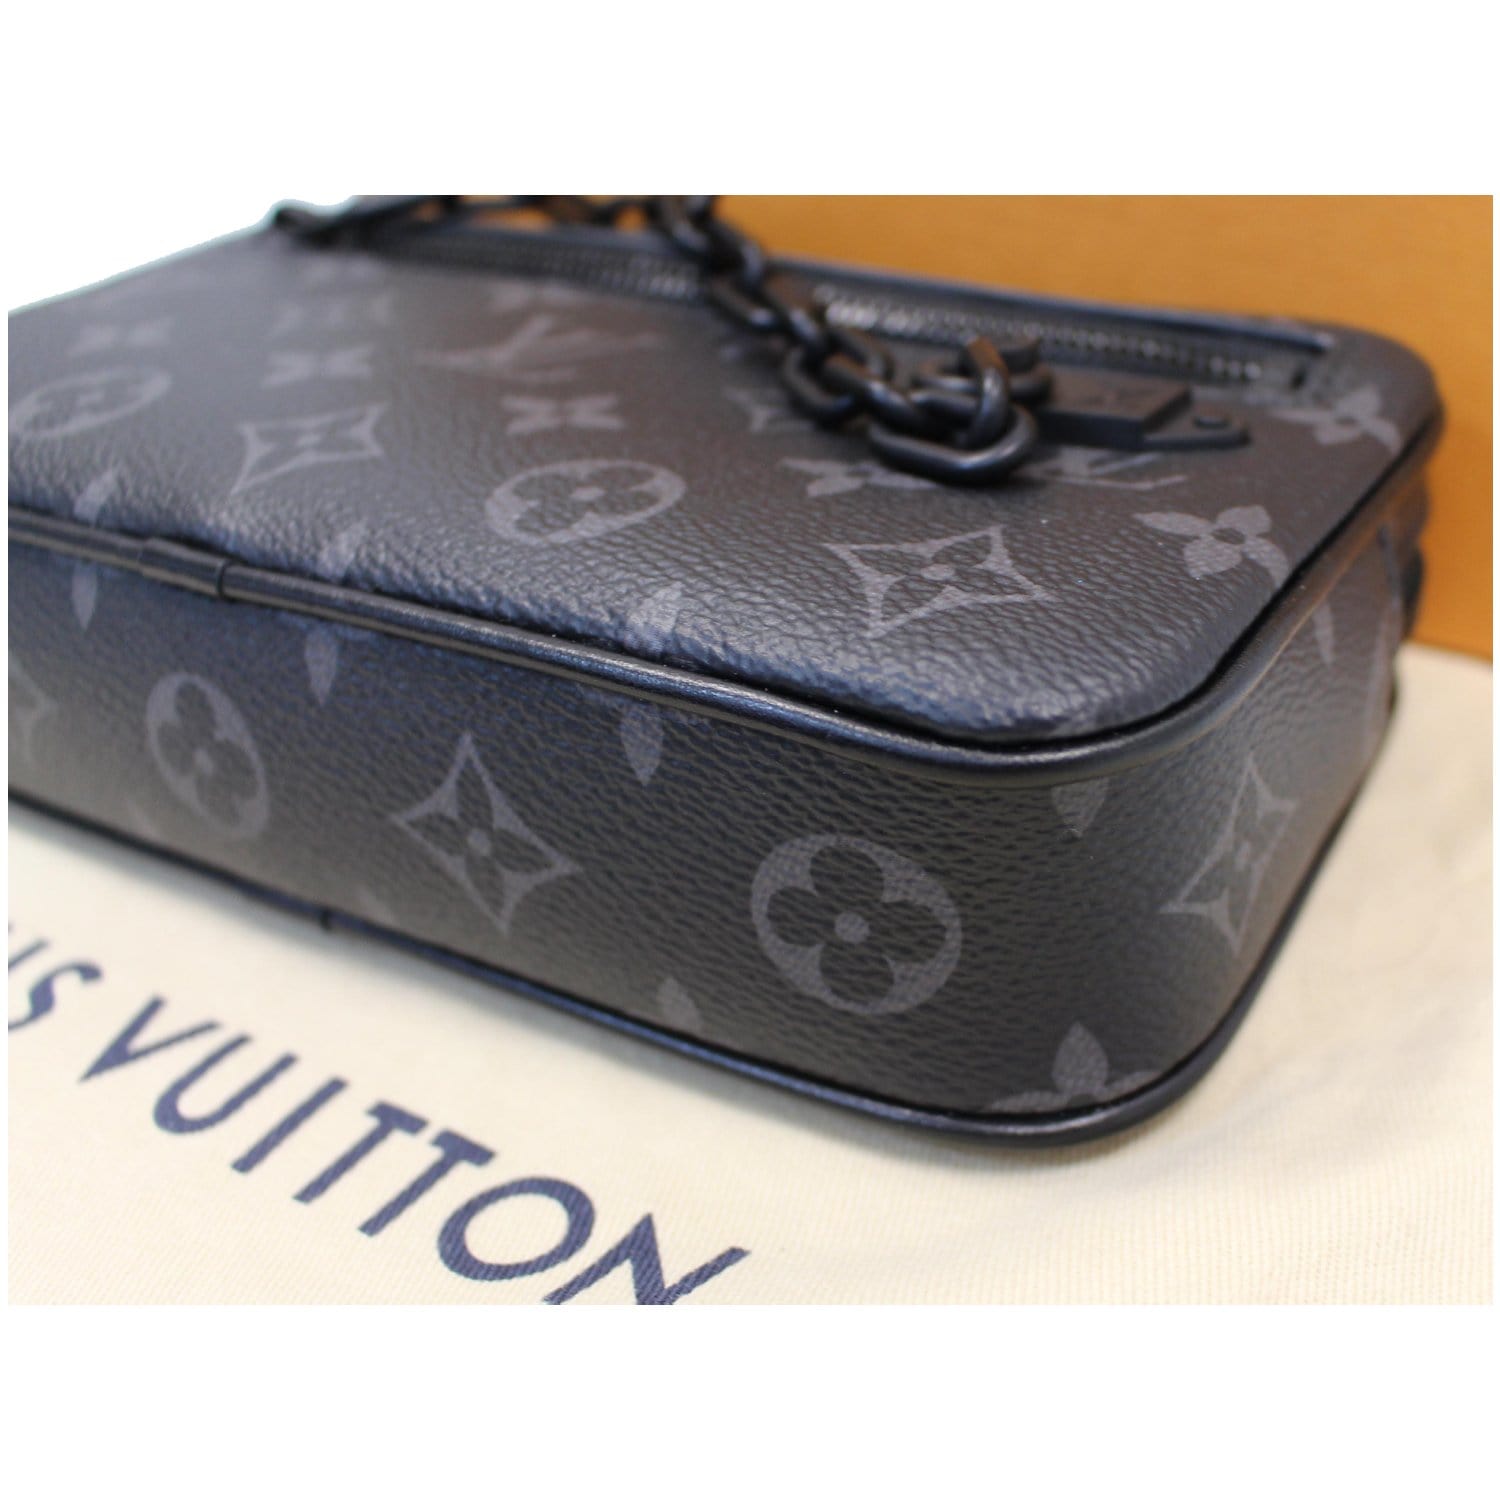 Louis Vuitton Pochette Volga Monogram with Black Hardware by The-Collectory